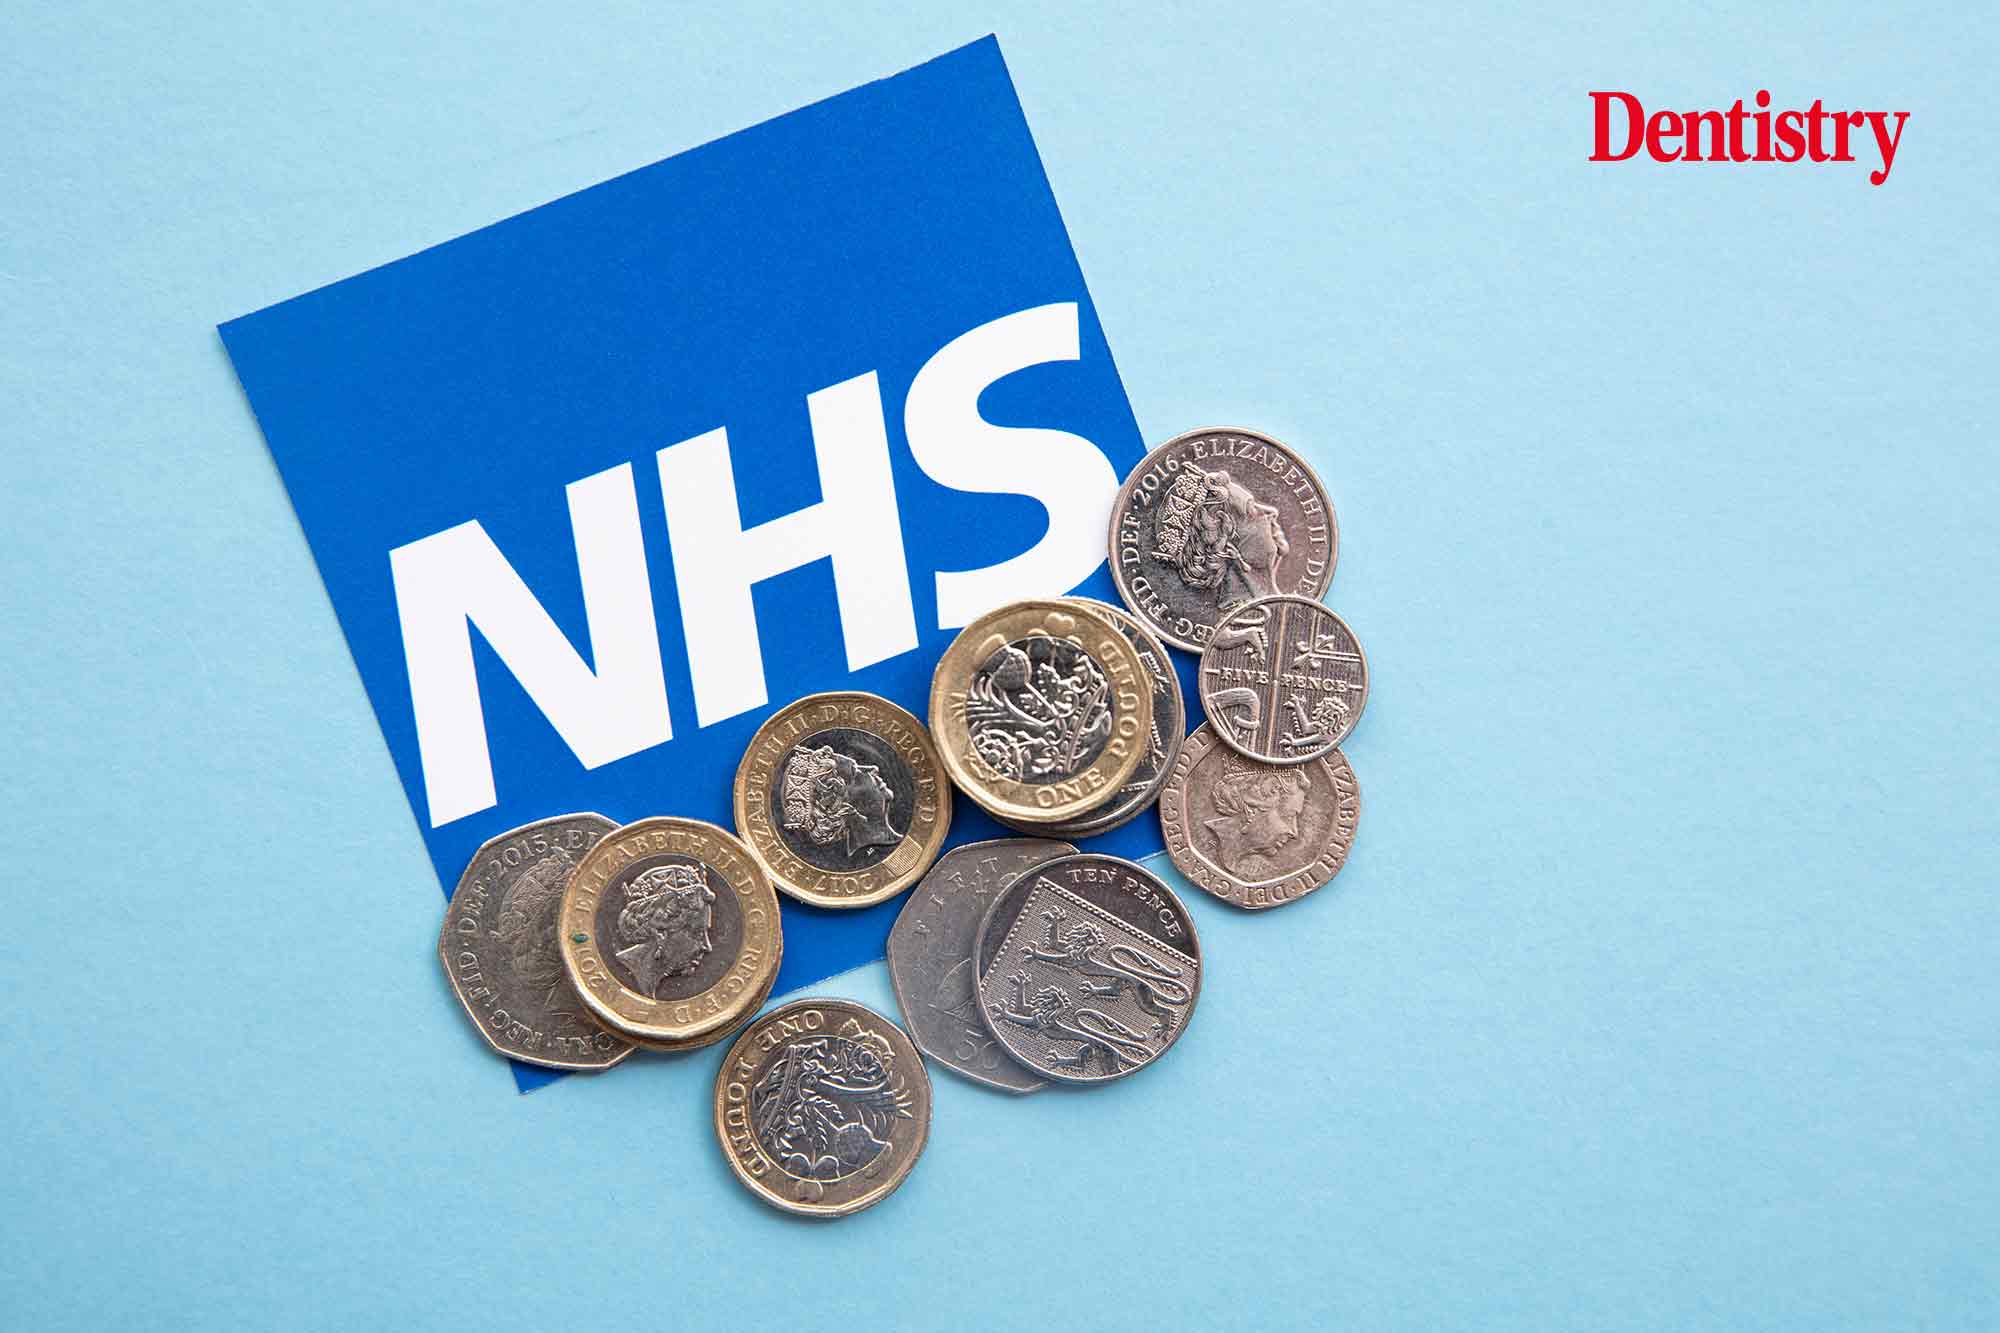 Poor pay is pushing talent out of NHS, says BDA